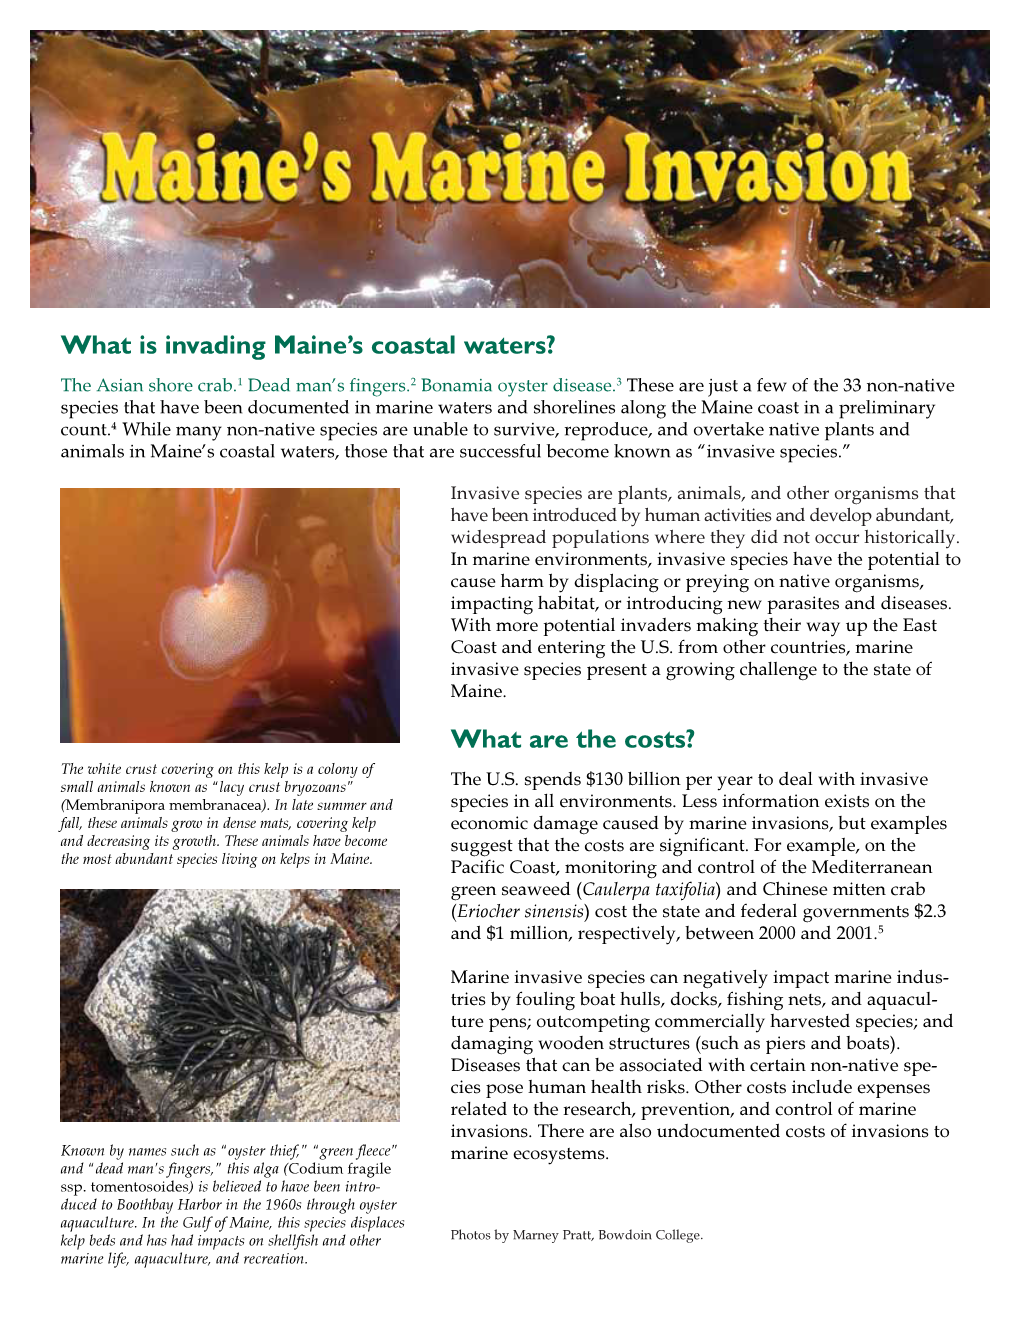 What Is Invading Maine's Coastal Waters? What Are the Costs?